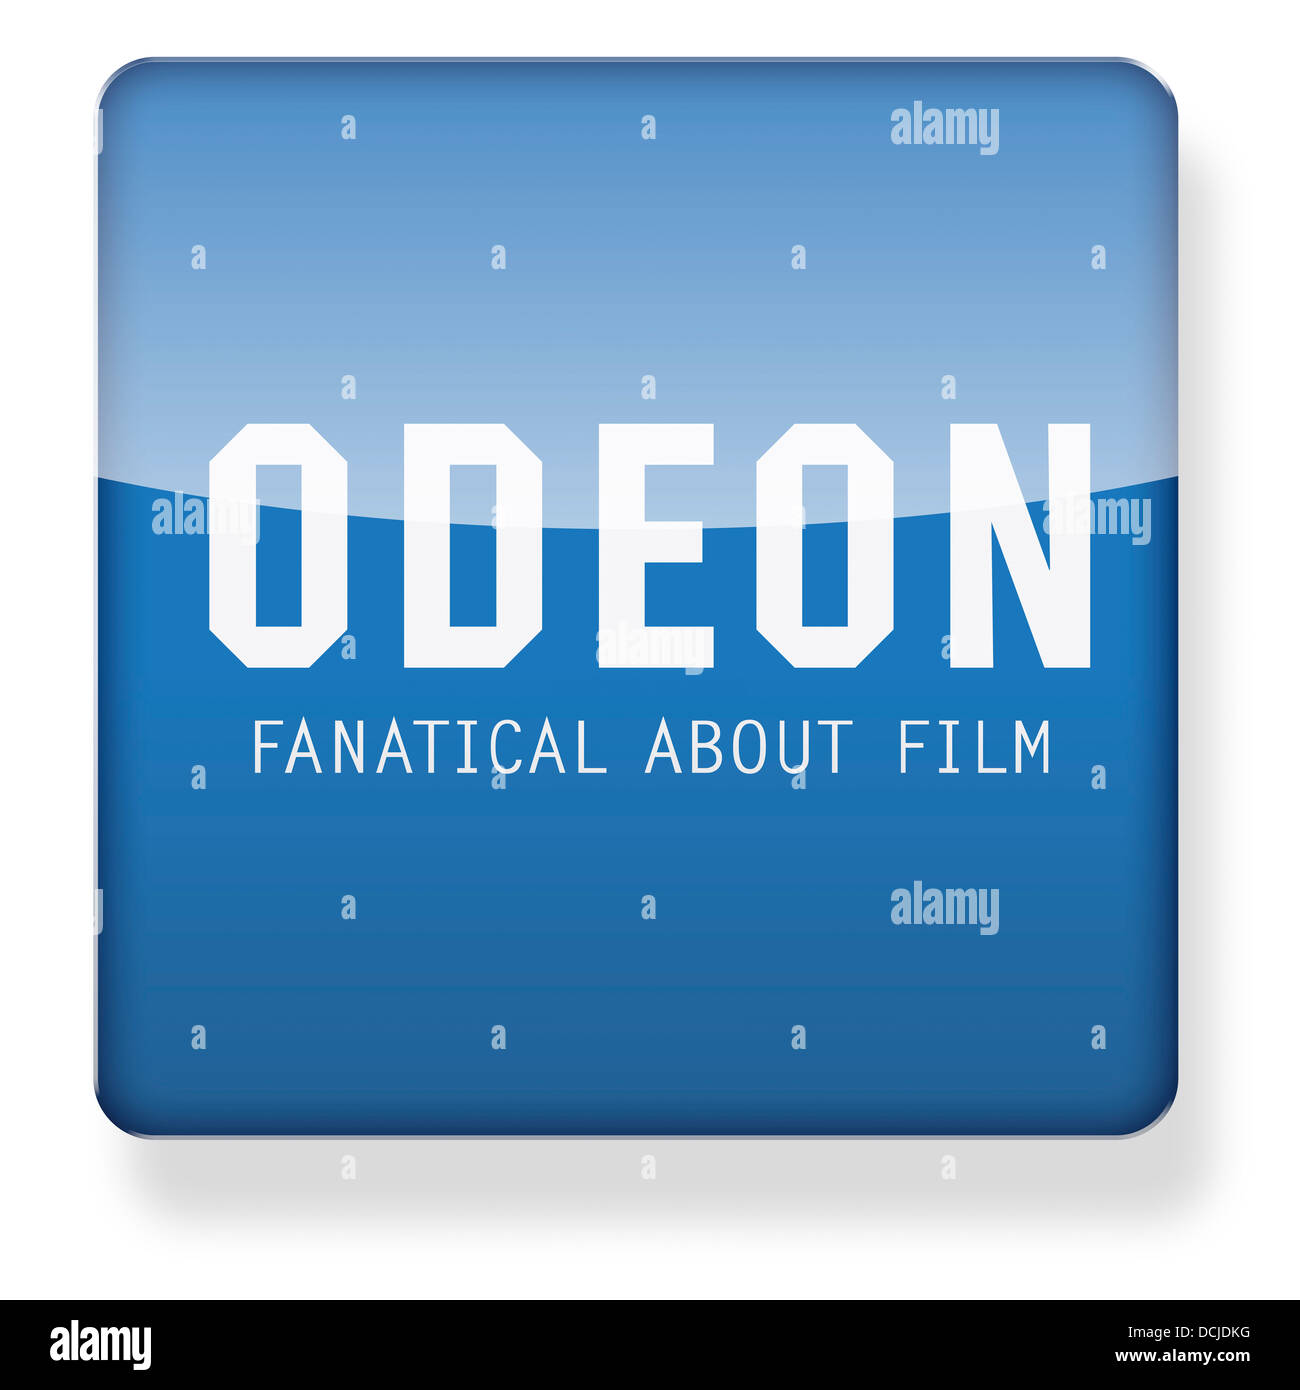 Odeon cinema logo as an app icon. Clipping path included. Stock Photo